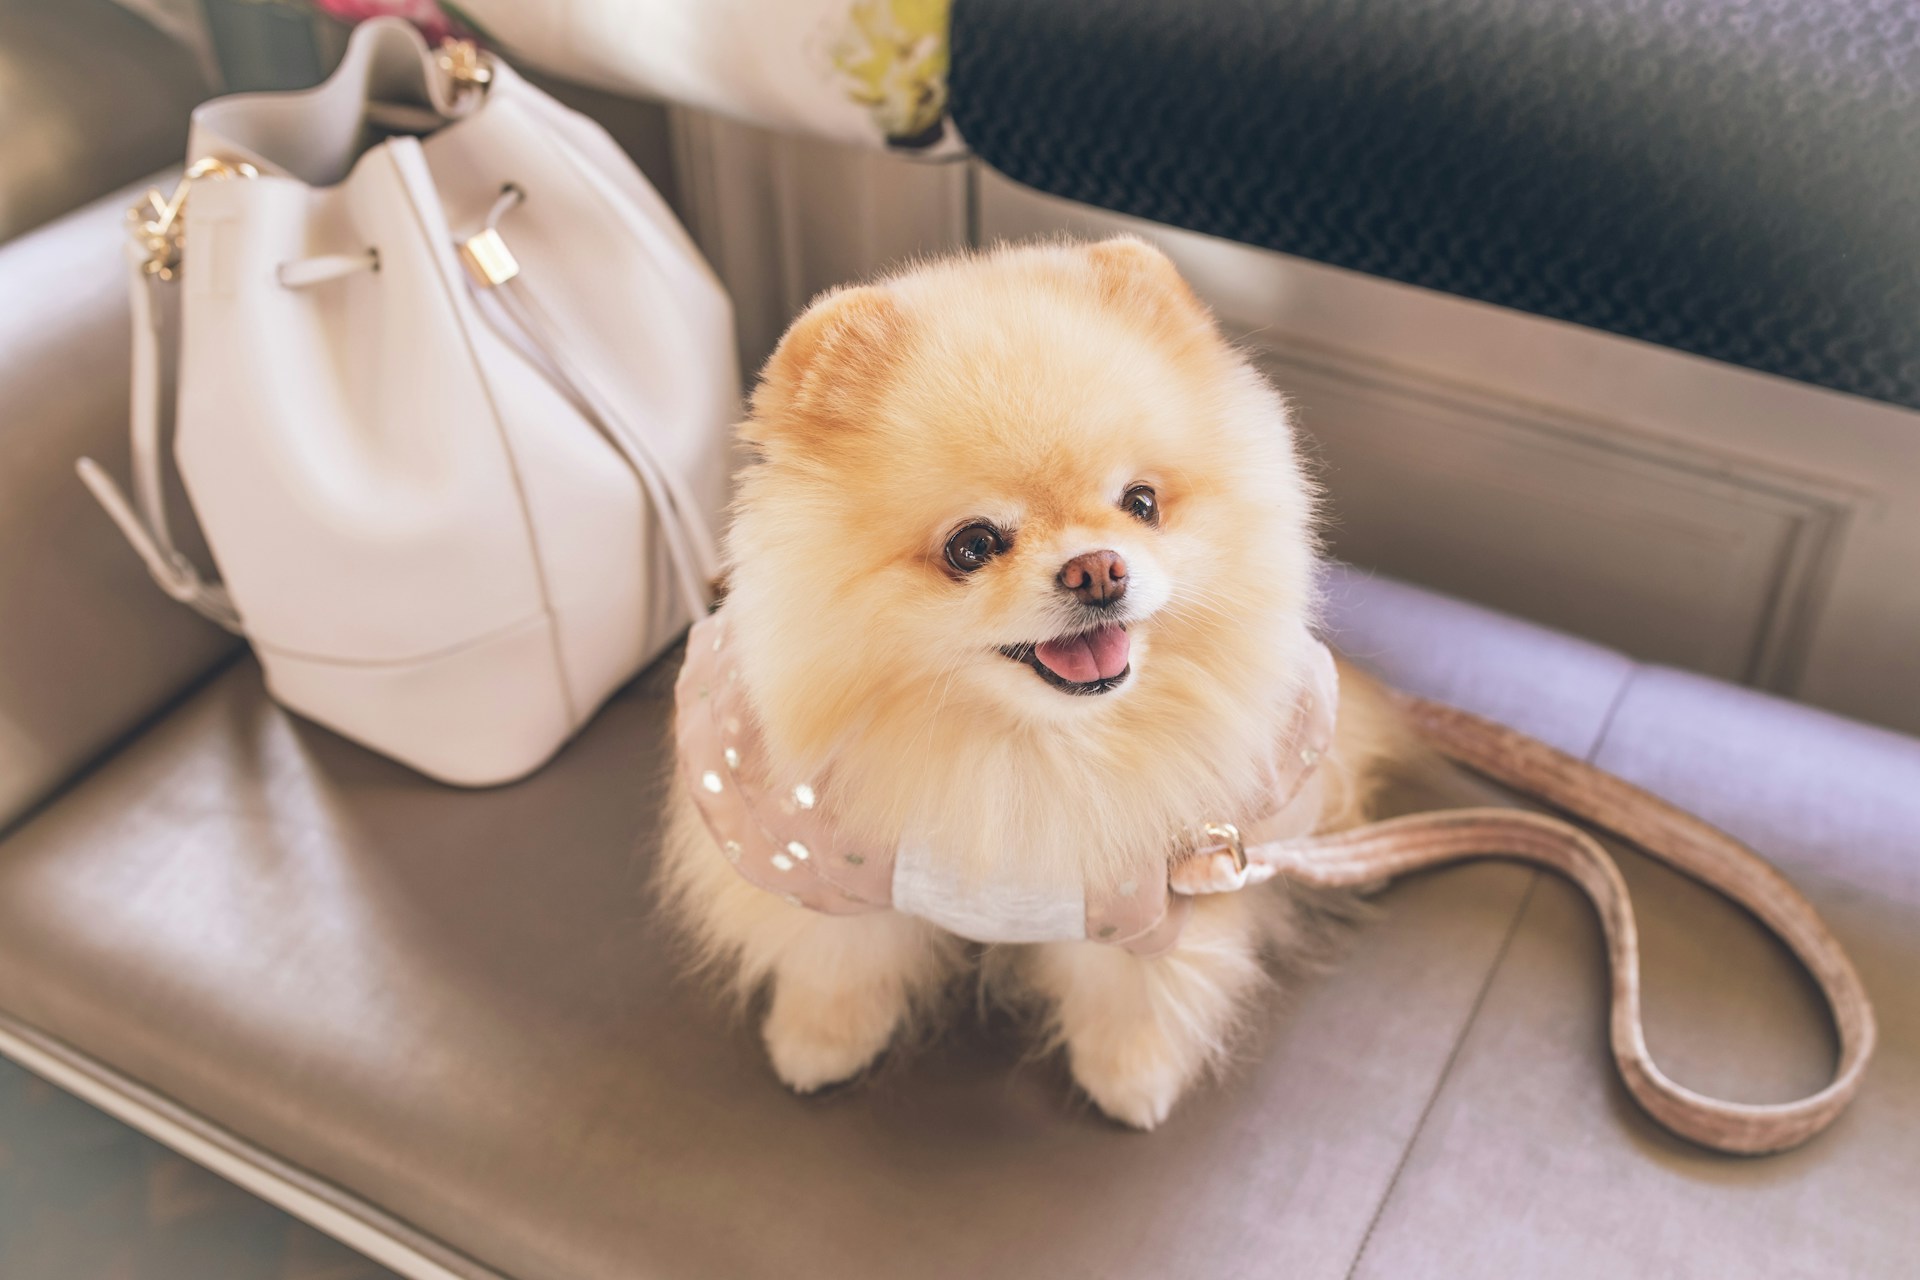 A small brown Pomeranian sitting on a couch next to a bag